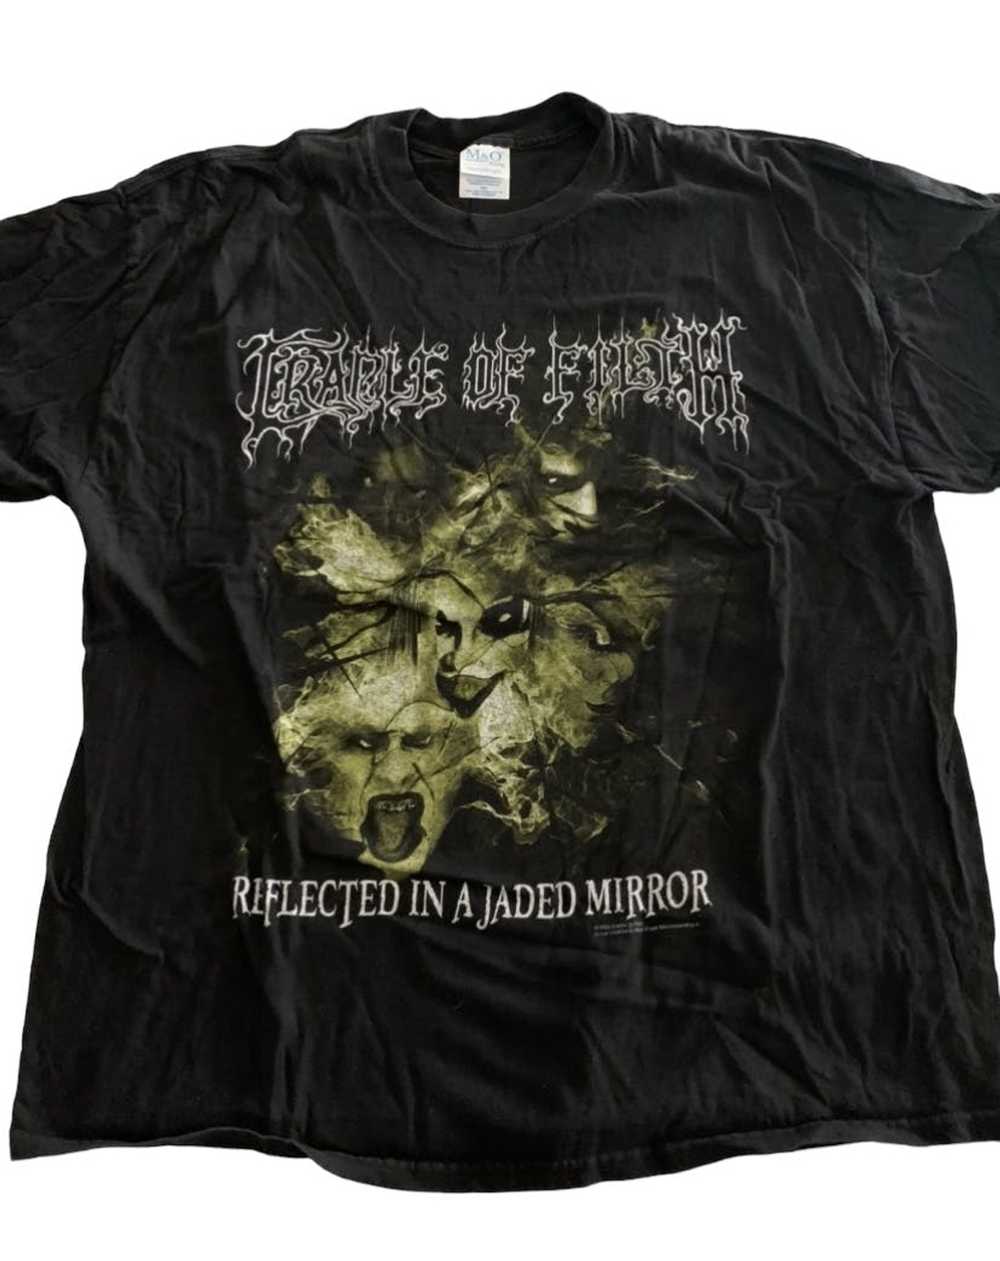 Archival Clothing Vintage Cradle of Filth Tee - image 4